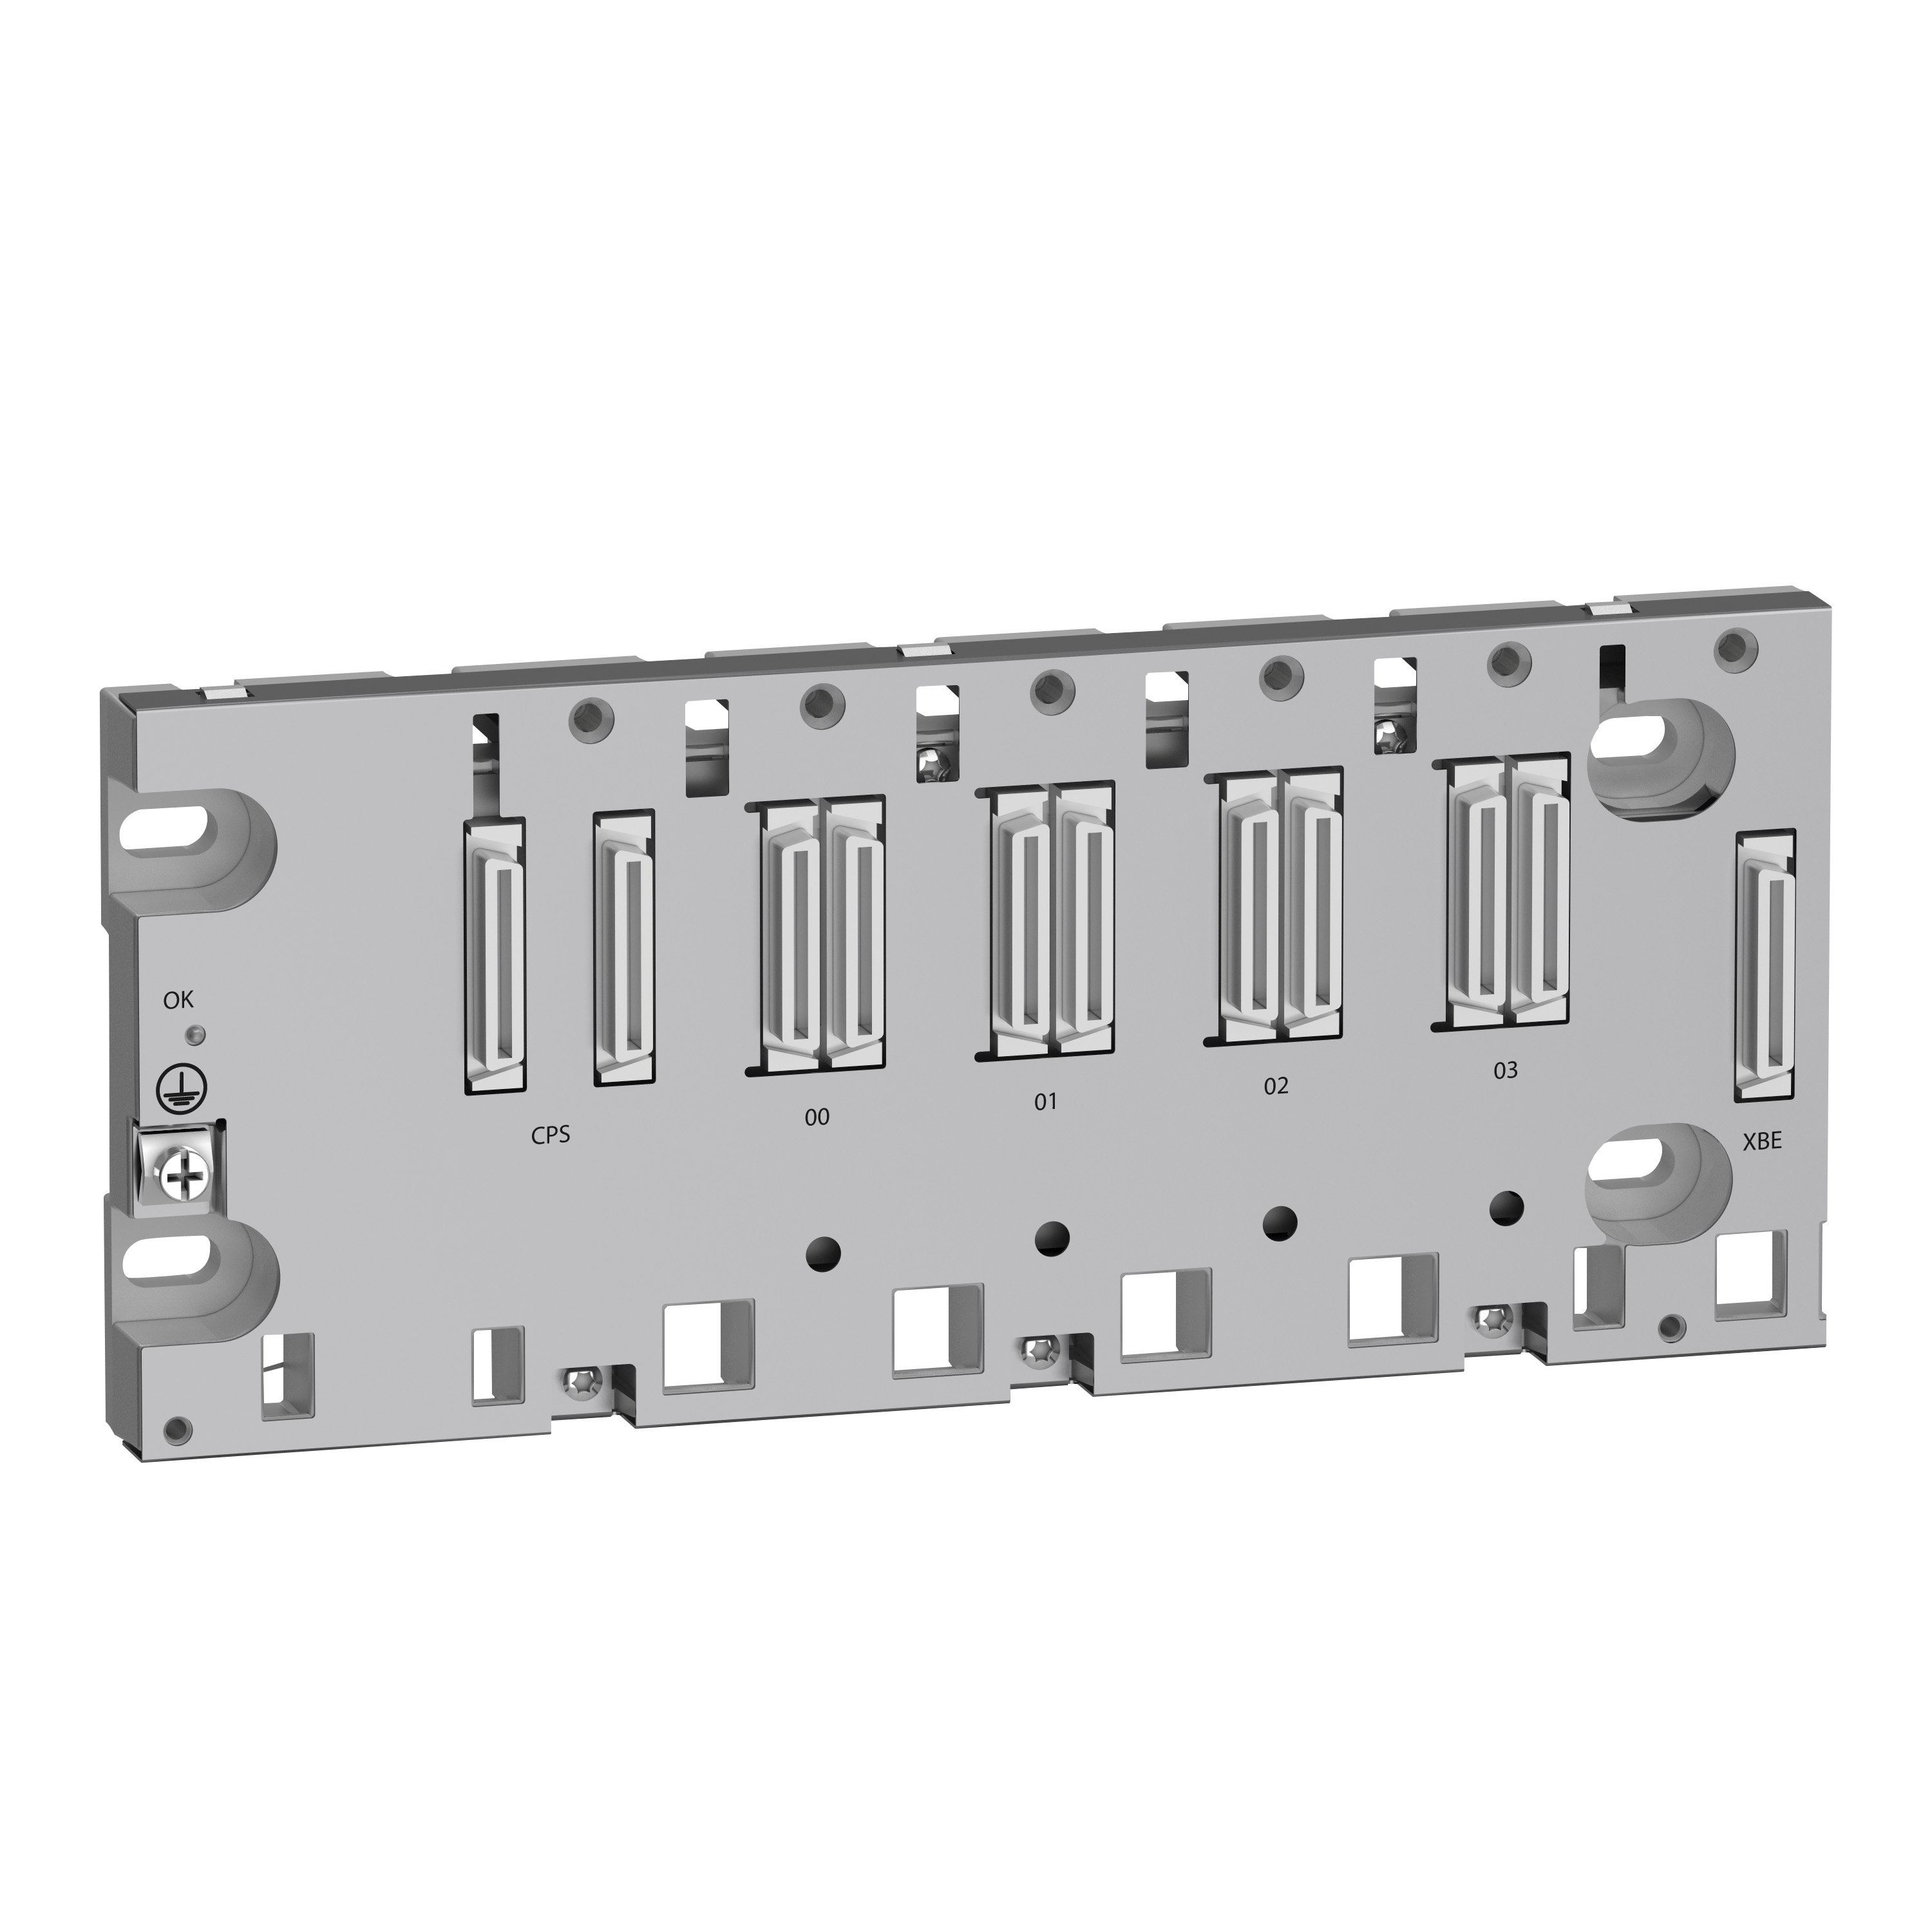 4 slots Ethernet backplane for PAC M580 and M340